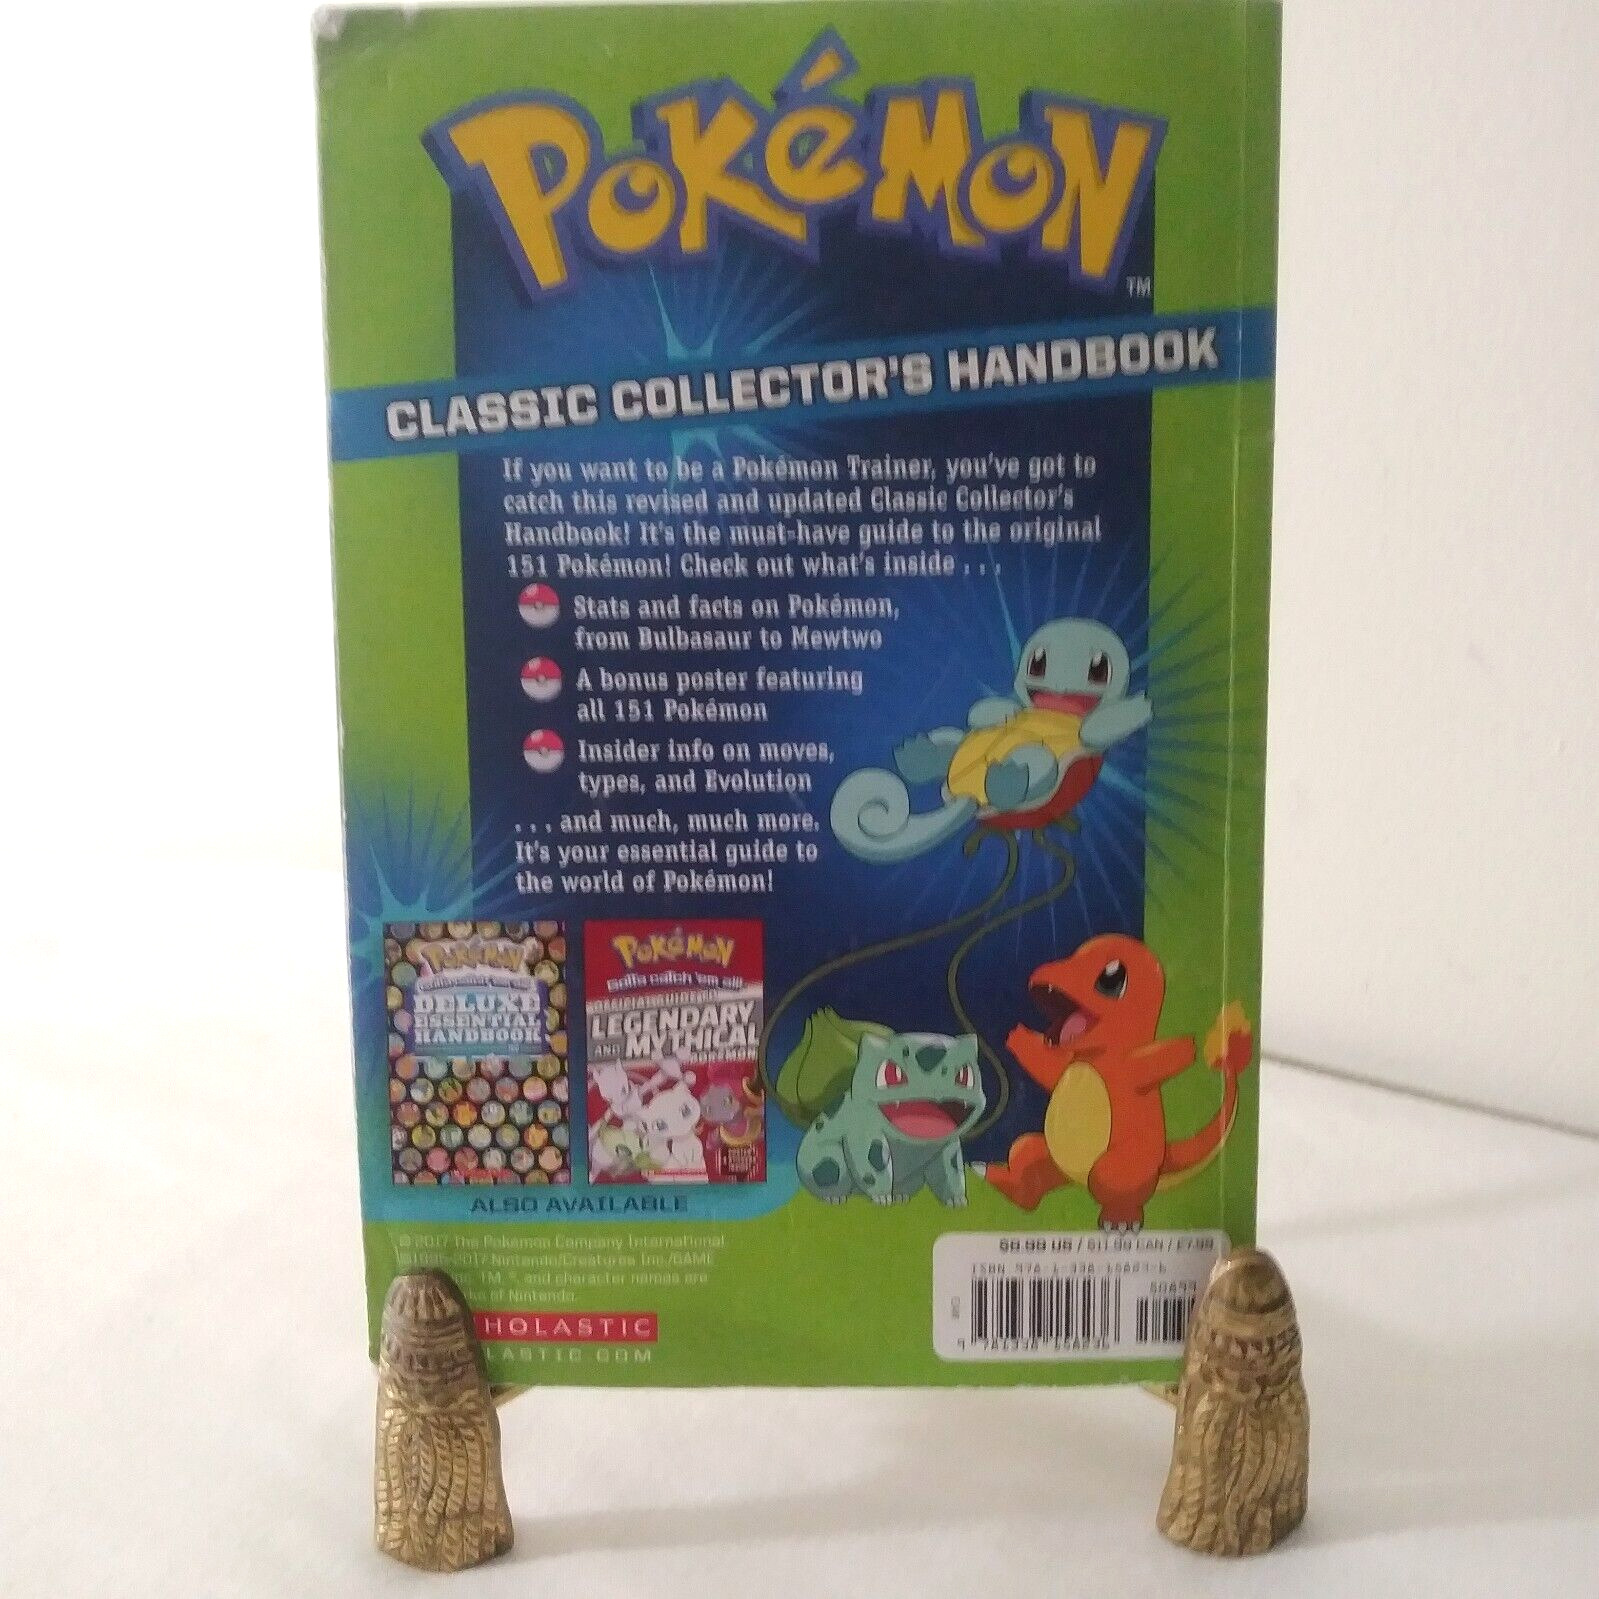 Pokemon: Classic Collector's Handbook by Scholastic Paperback Book NO Poster